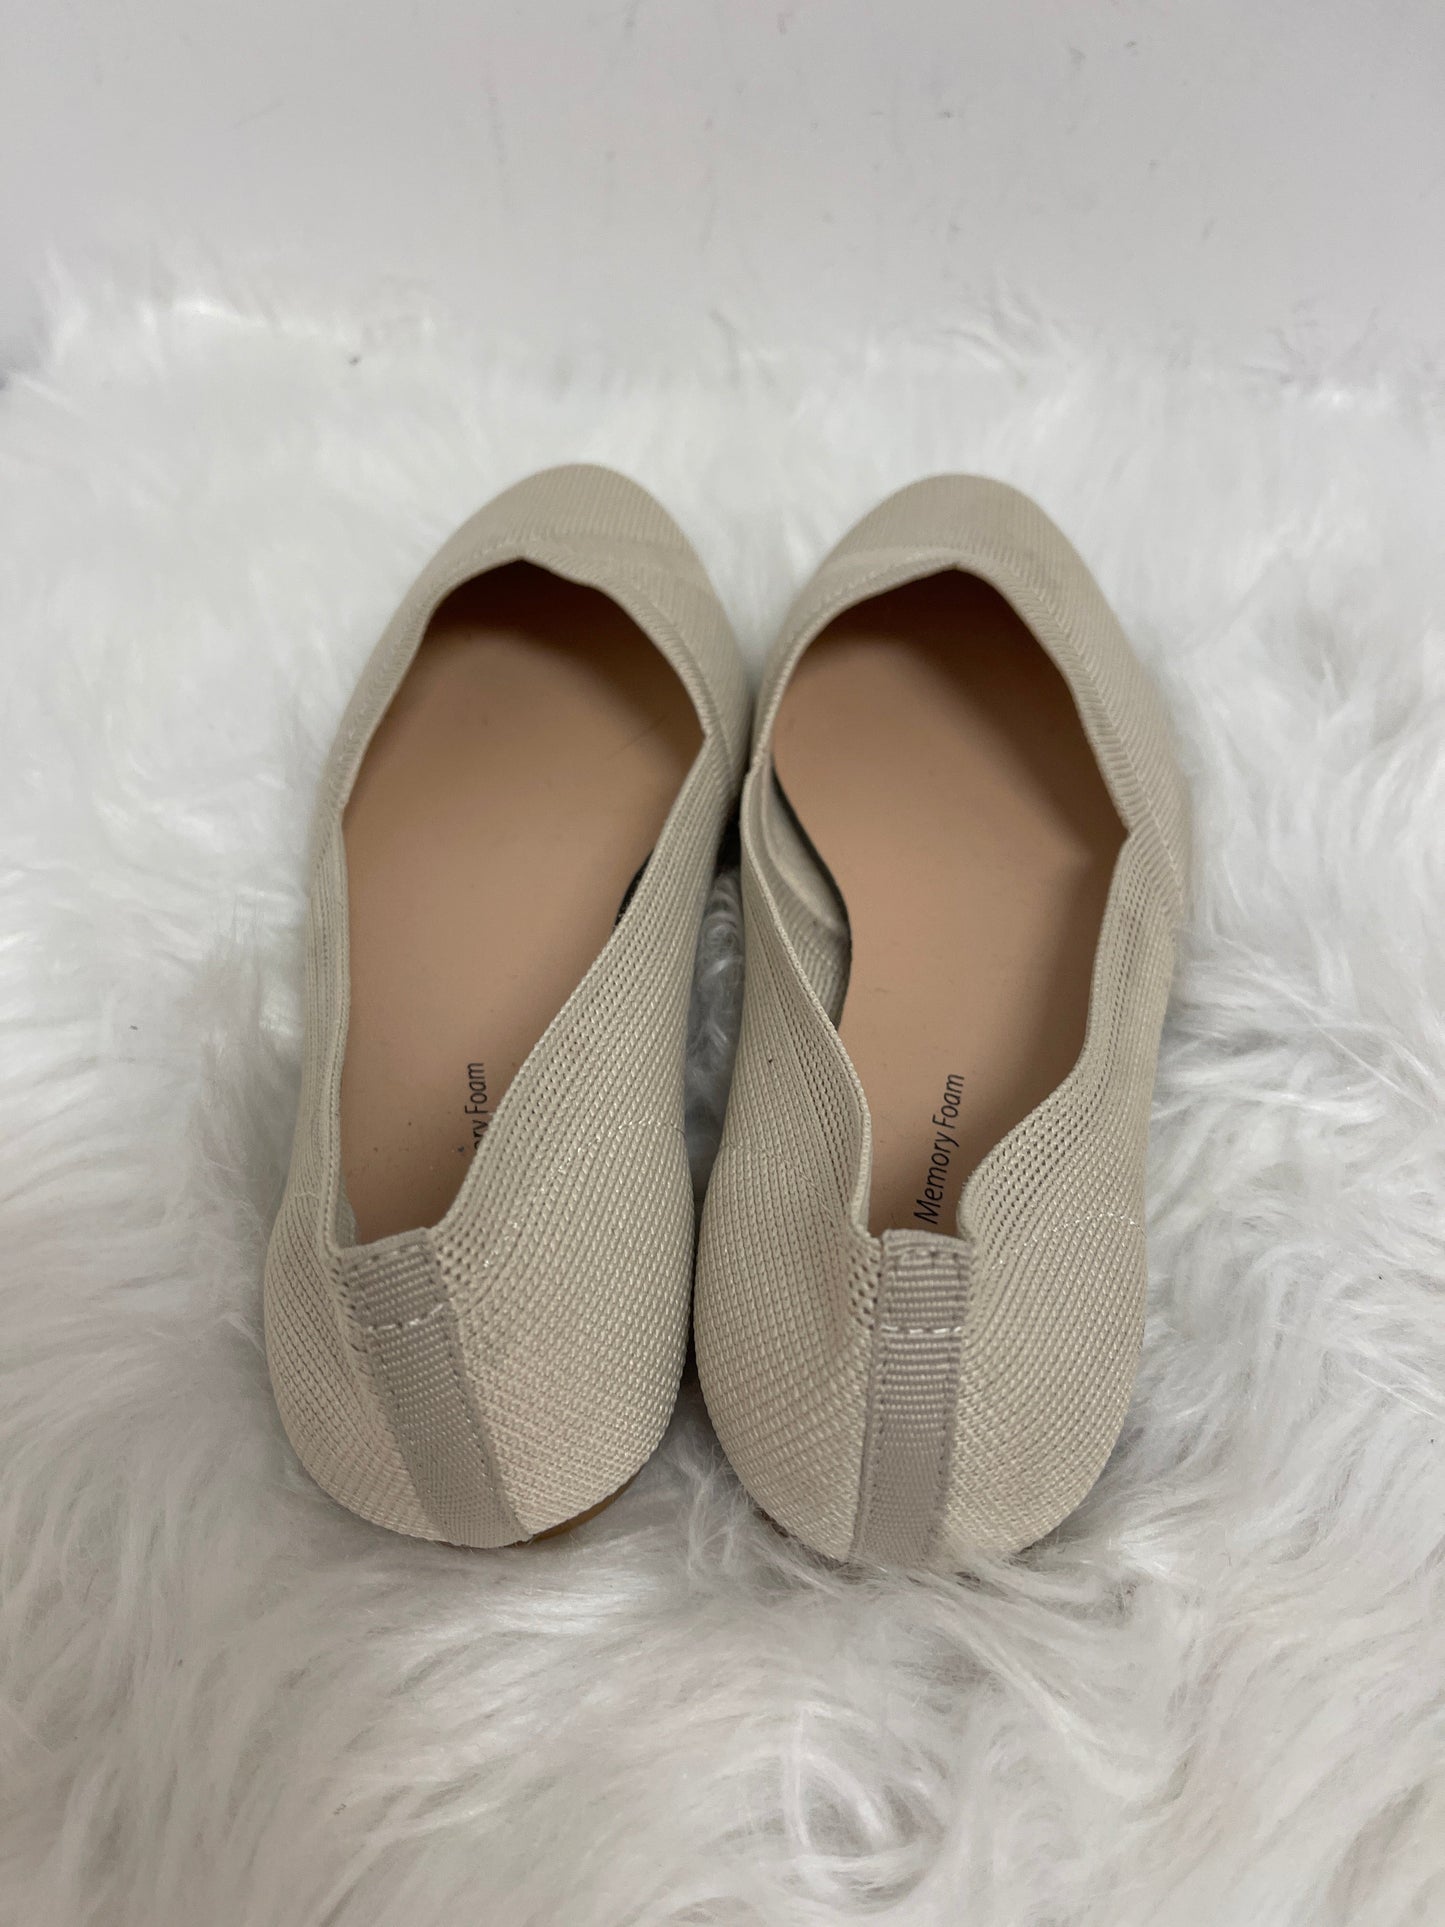 Cream Shoes Flats Time And Tru, Size 6.5